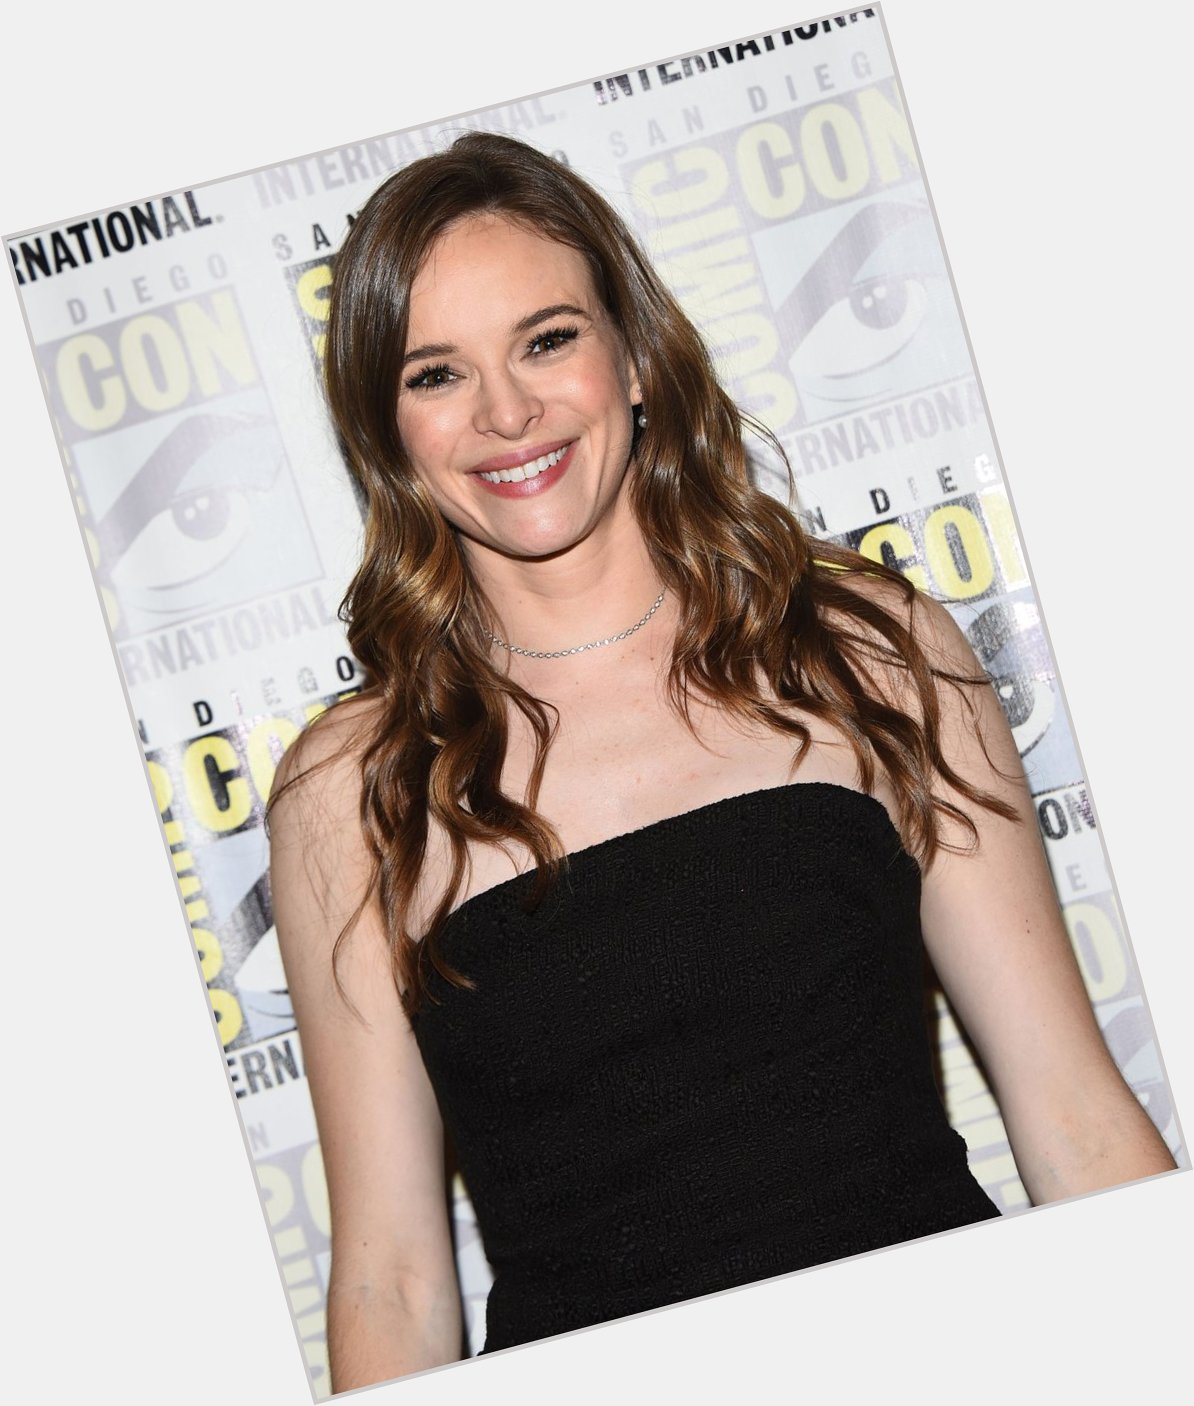 Happy 33rd Birthday Shout Out to Ms. Frost - Danielle Panabaker!! 